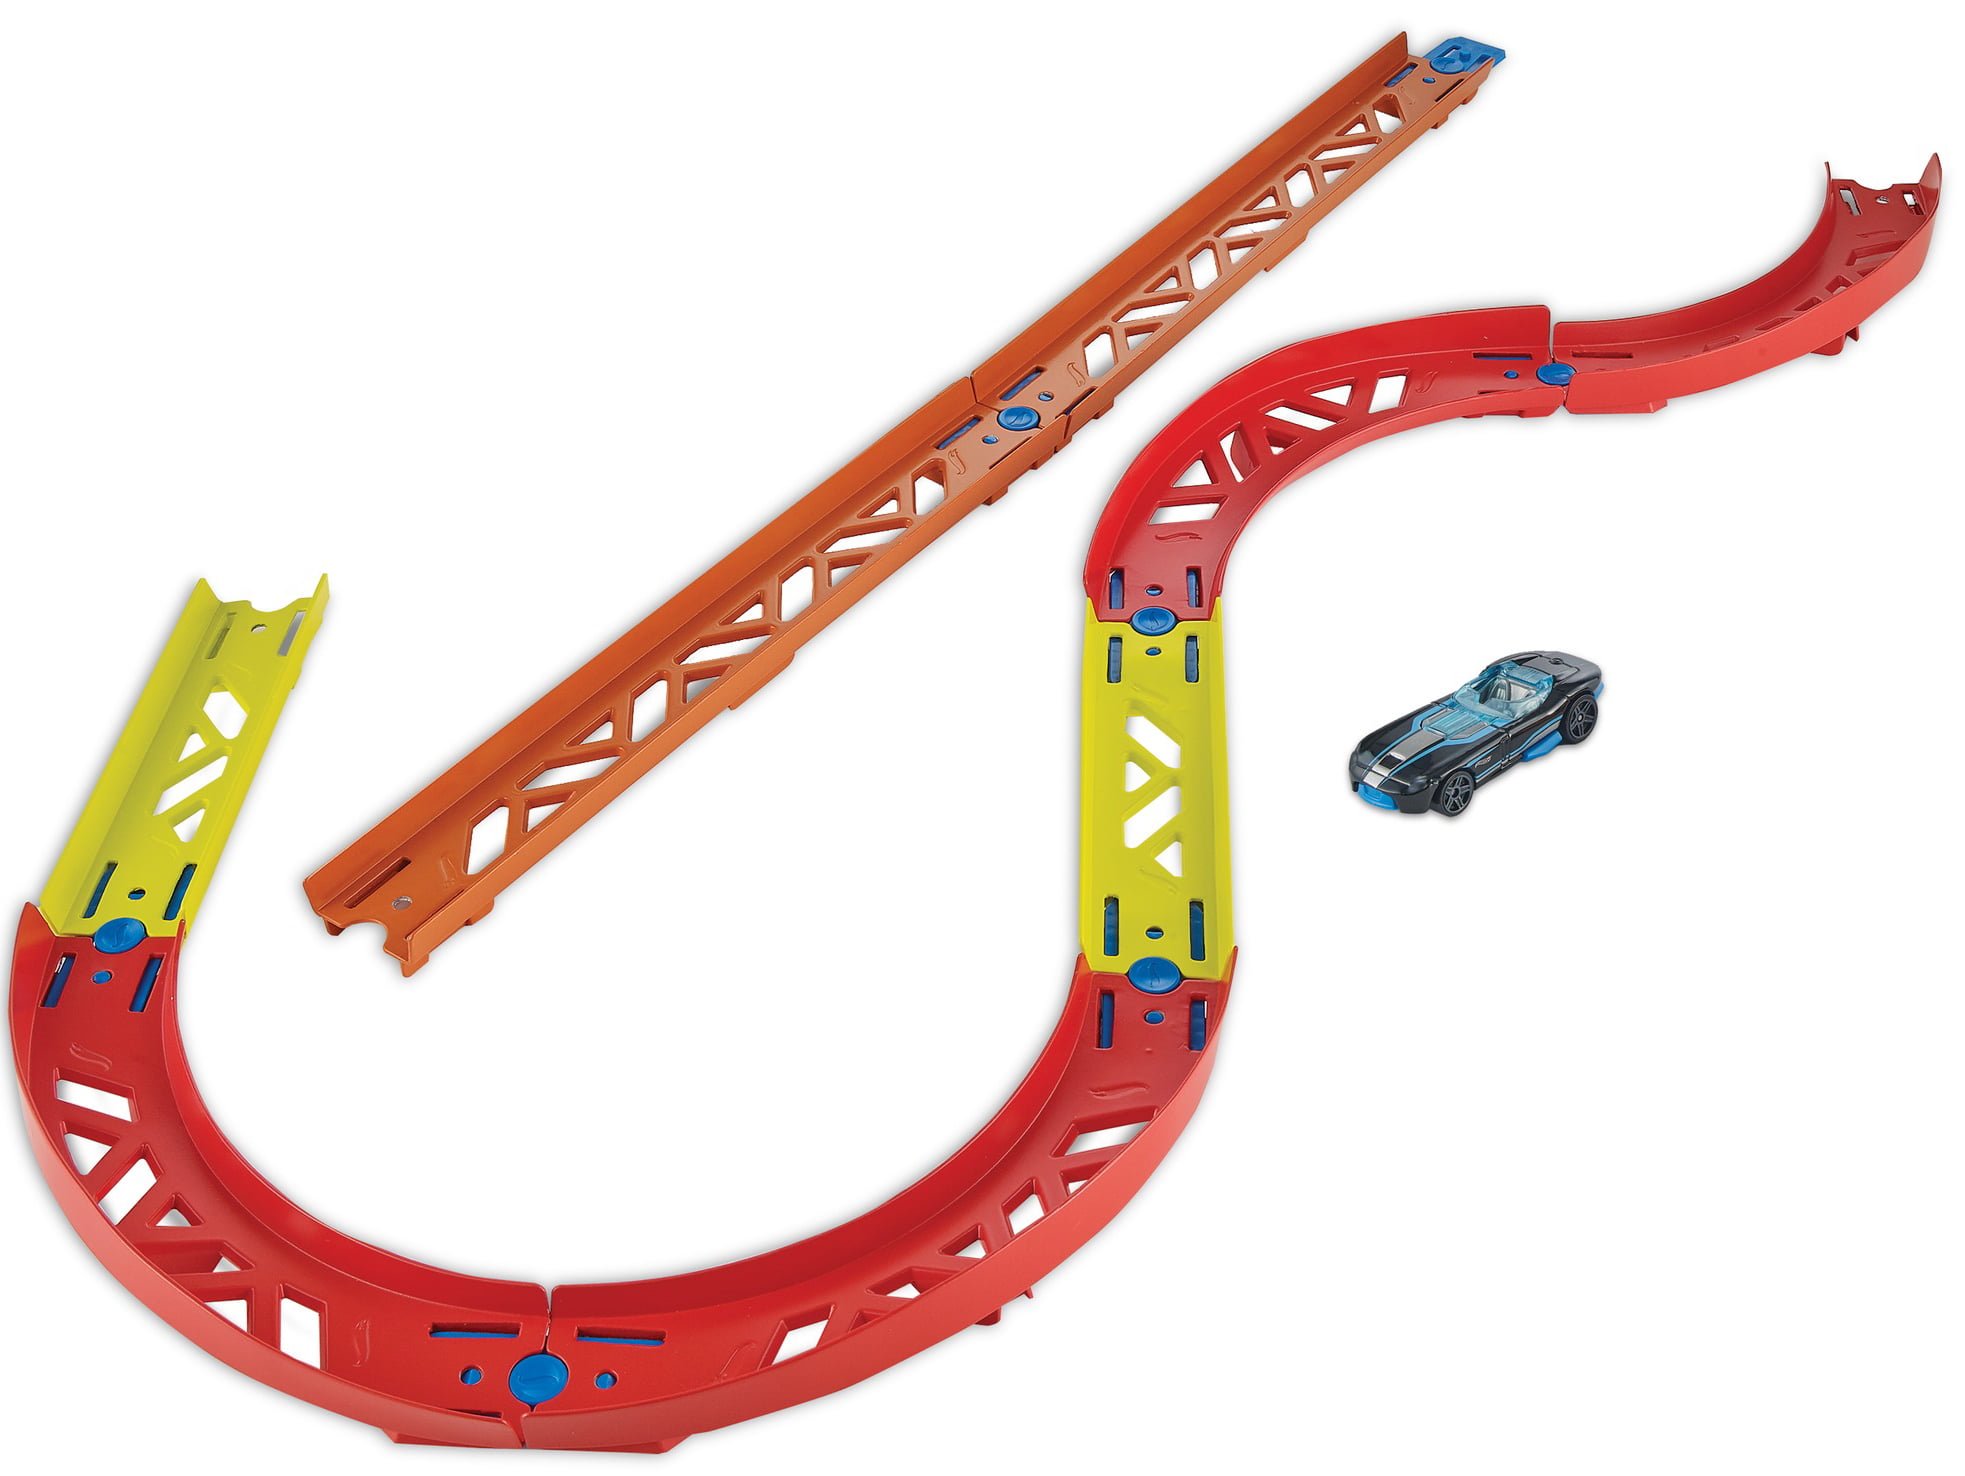 MATTEL HOT WHEELS 2 PIECE TRACK SET 48 INCHES OF TRACK 